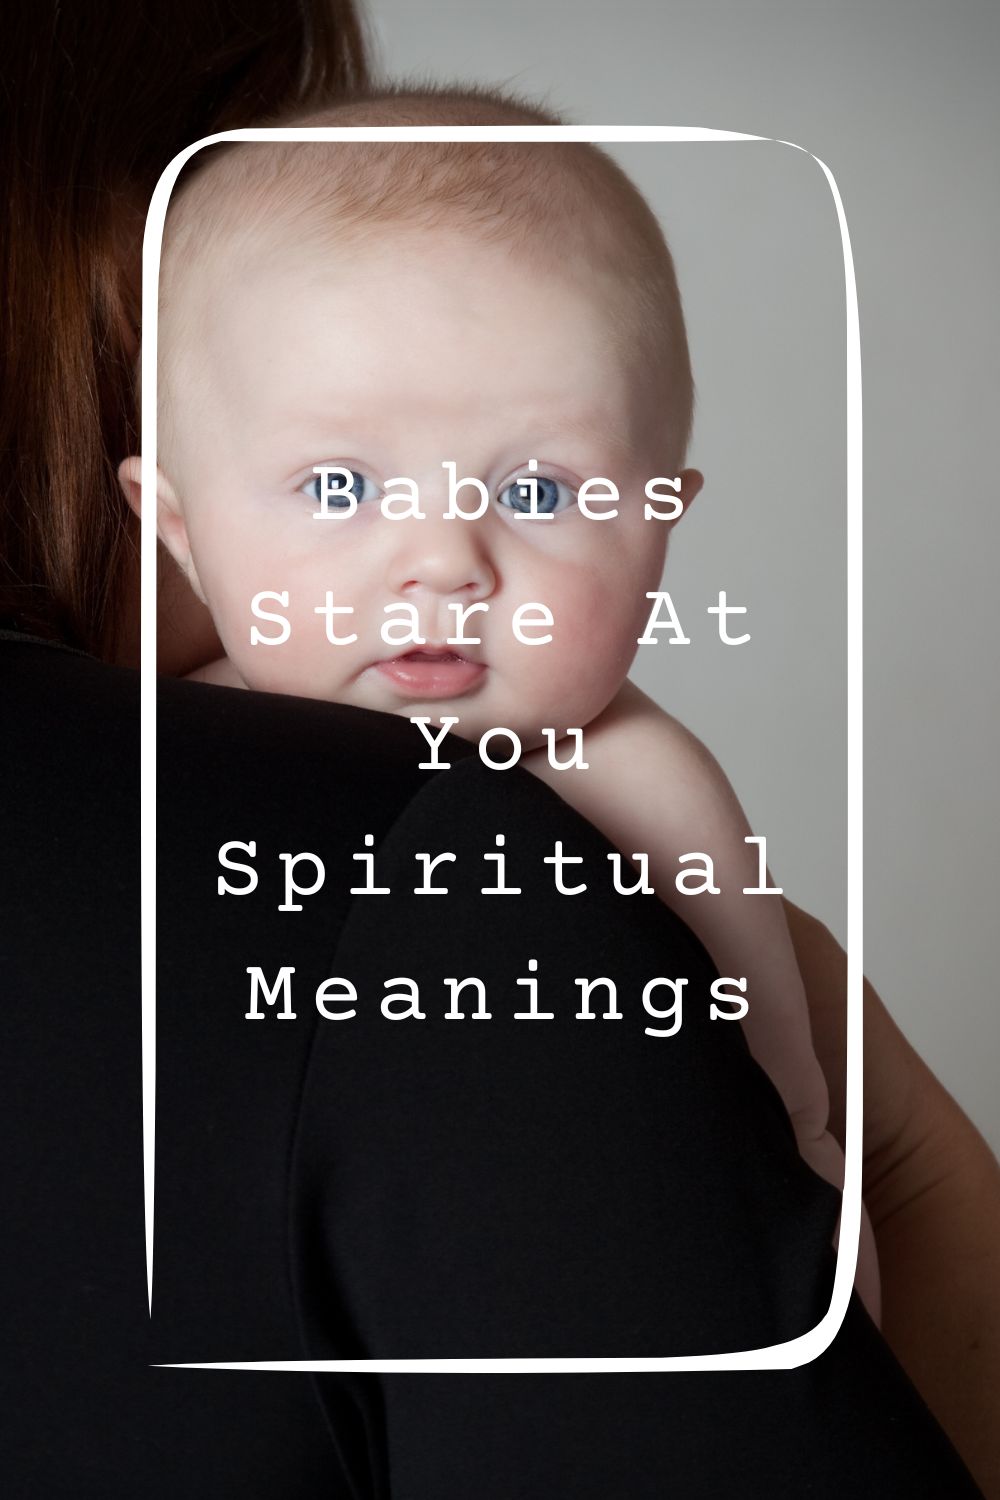 Babies Stare At You Spiritual Meanings 1